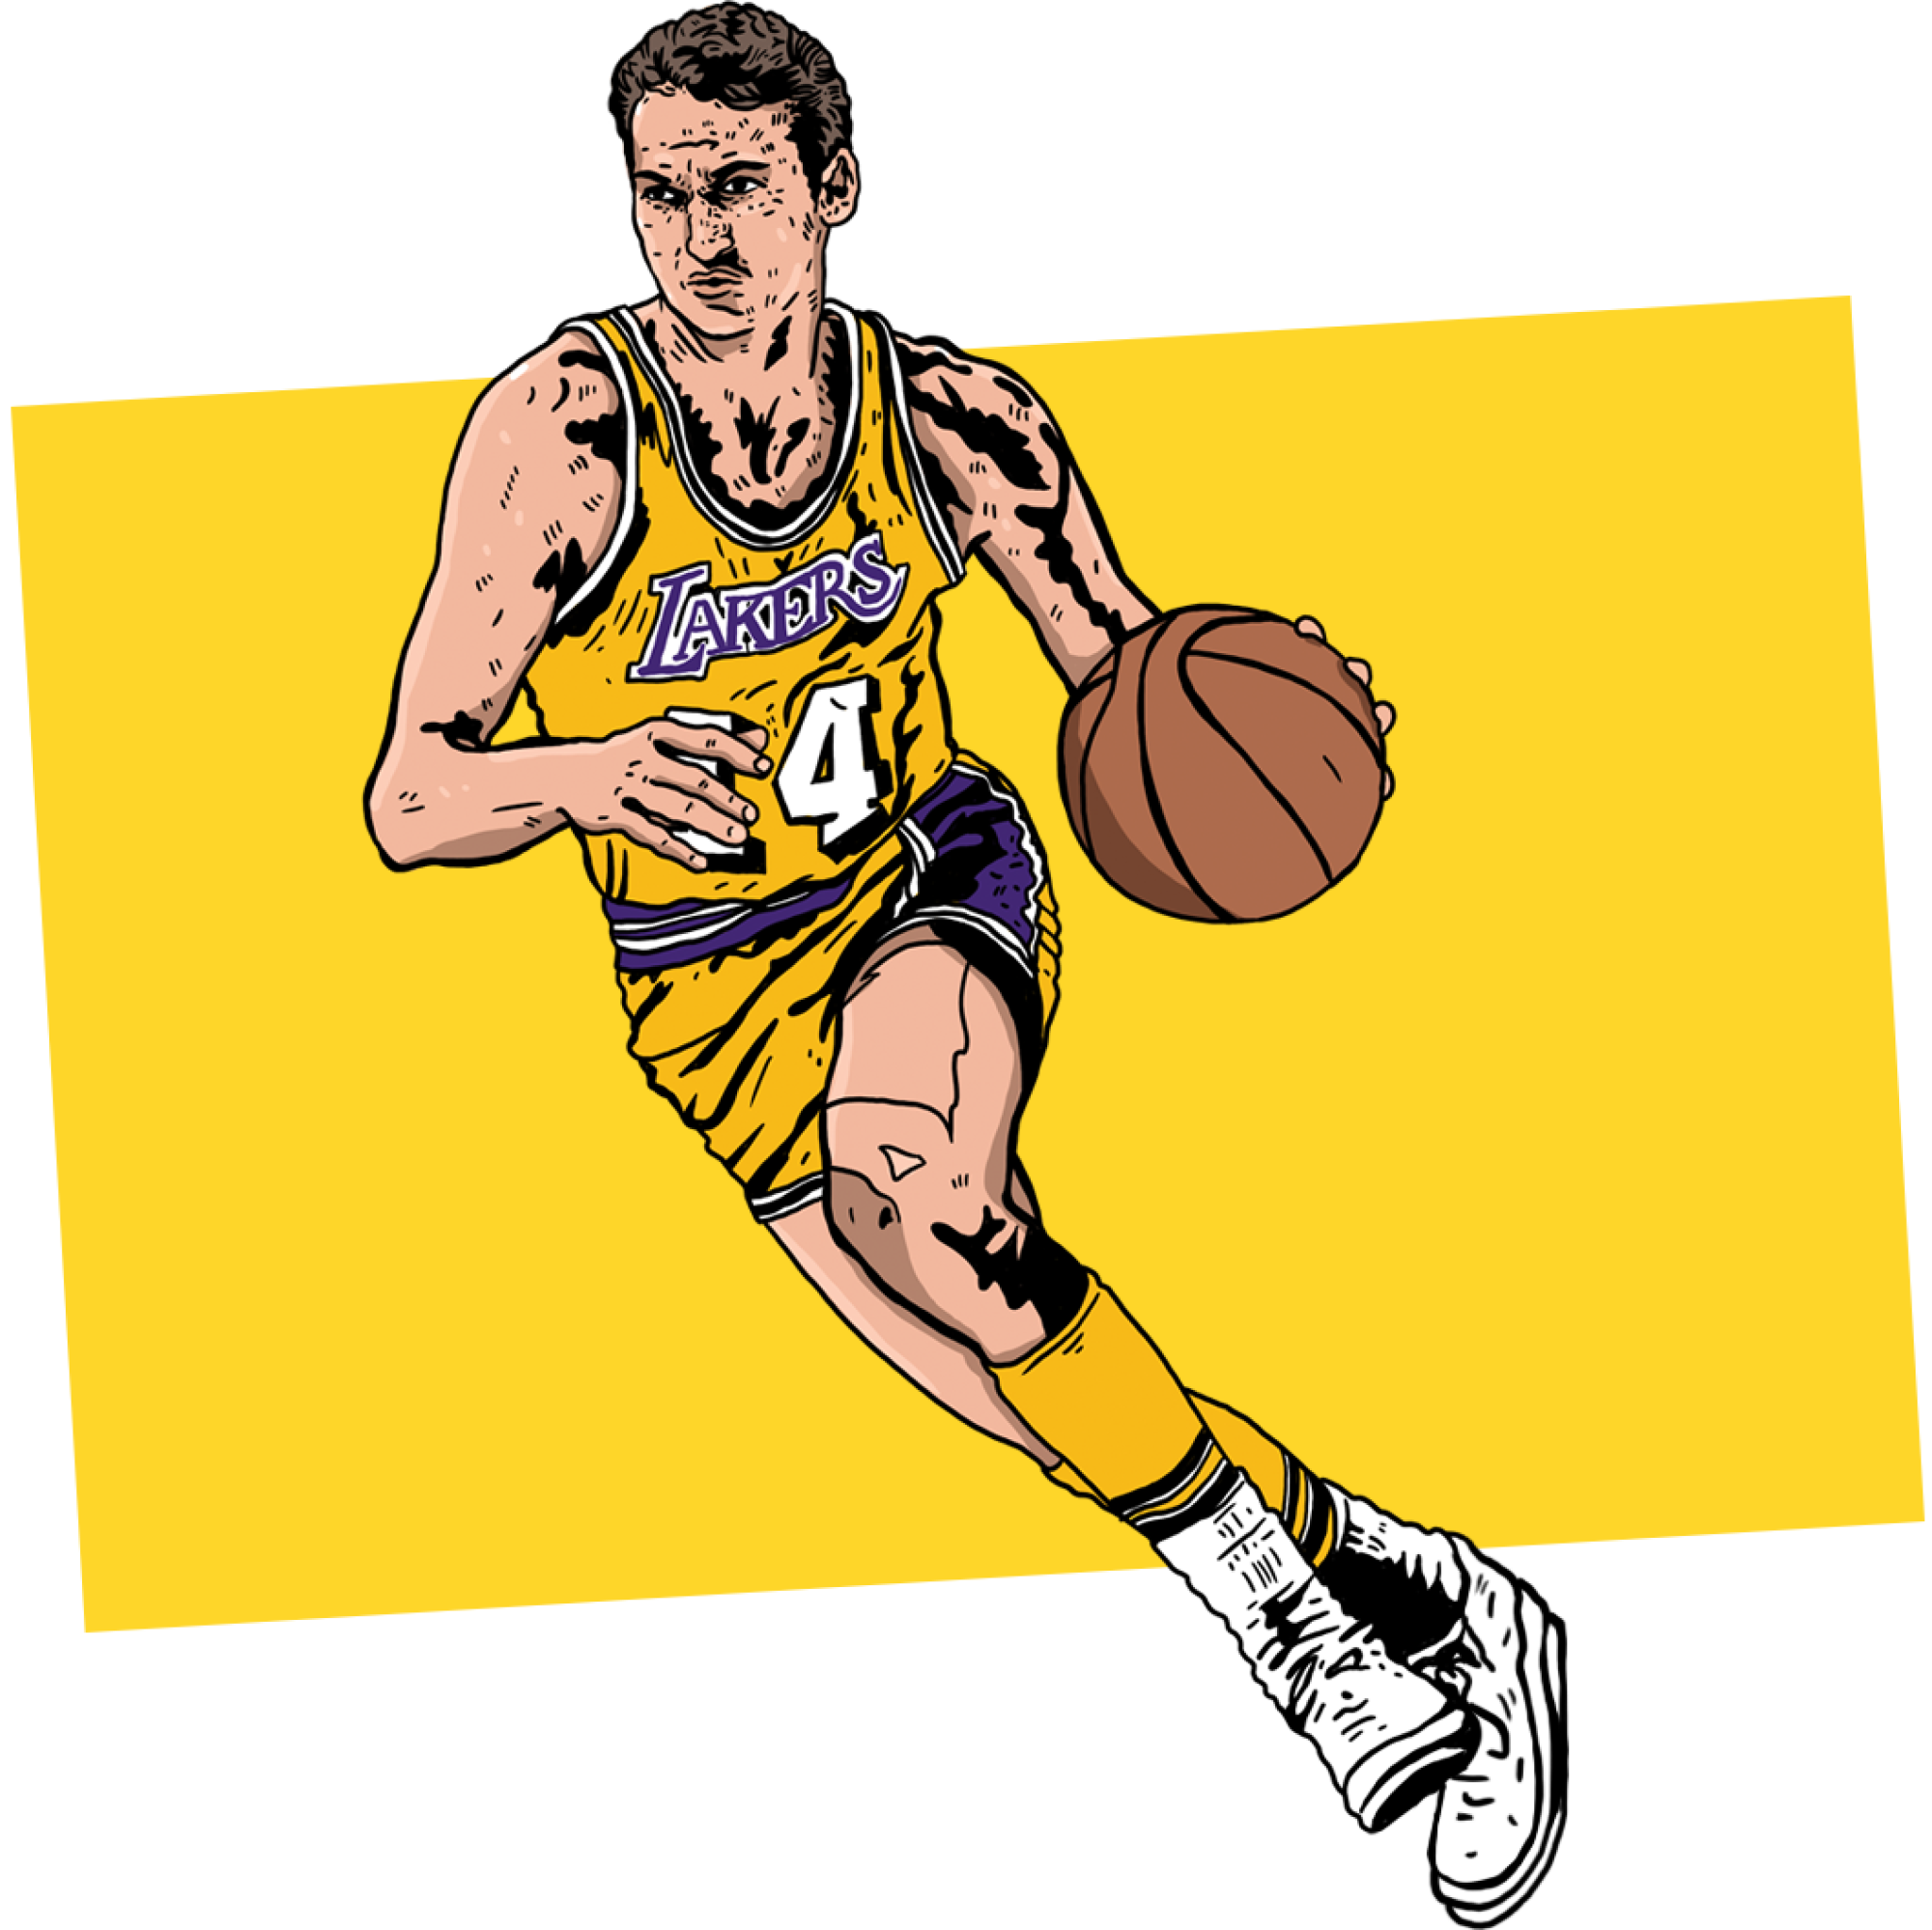 Illustration of Jerry West in a yellow #44 jersey dribbling the ball.